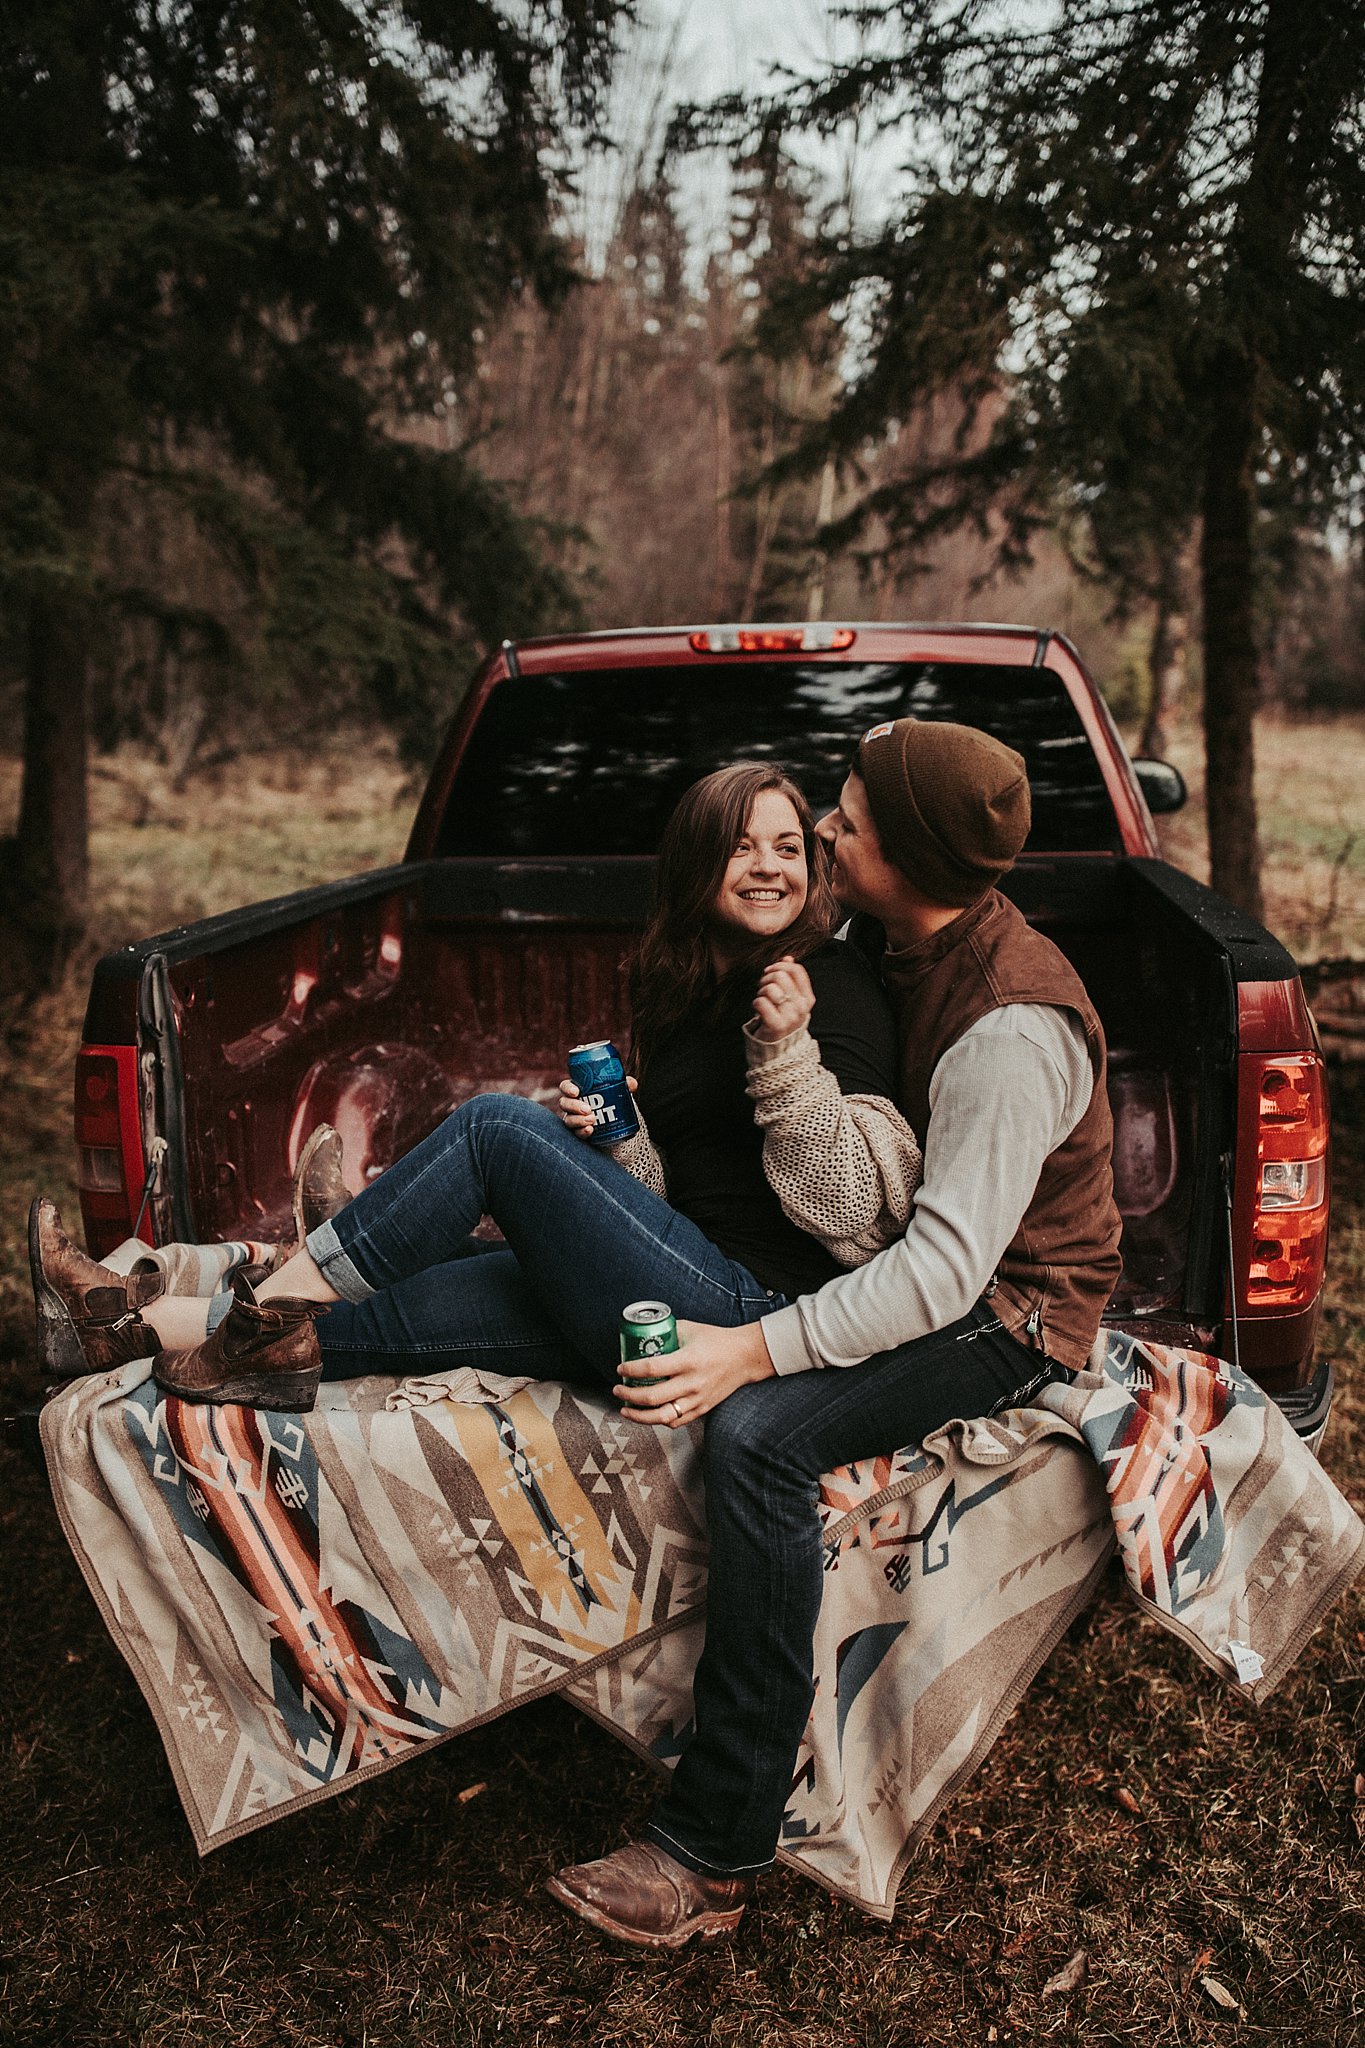 Husband and wife photos in a chevy truck